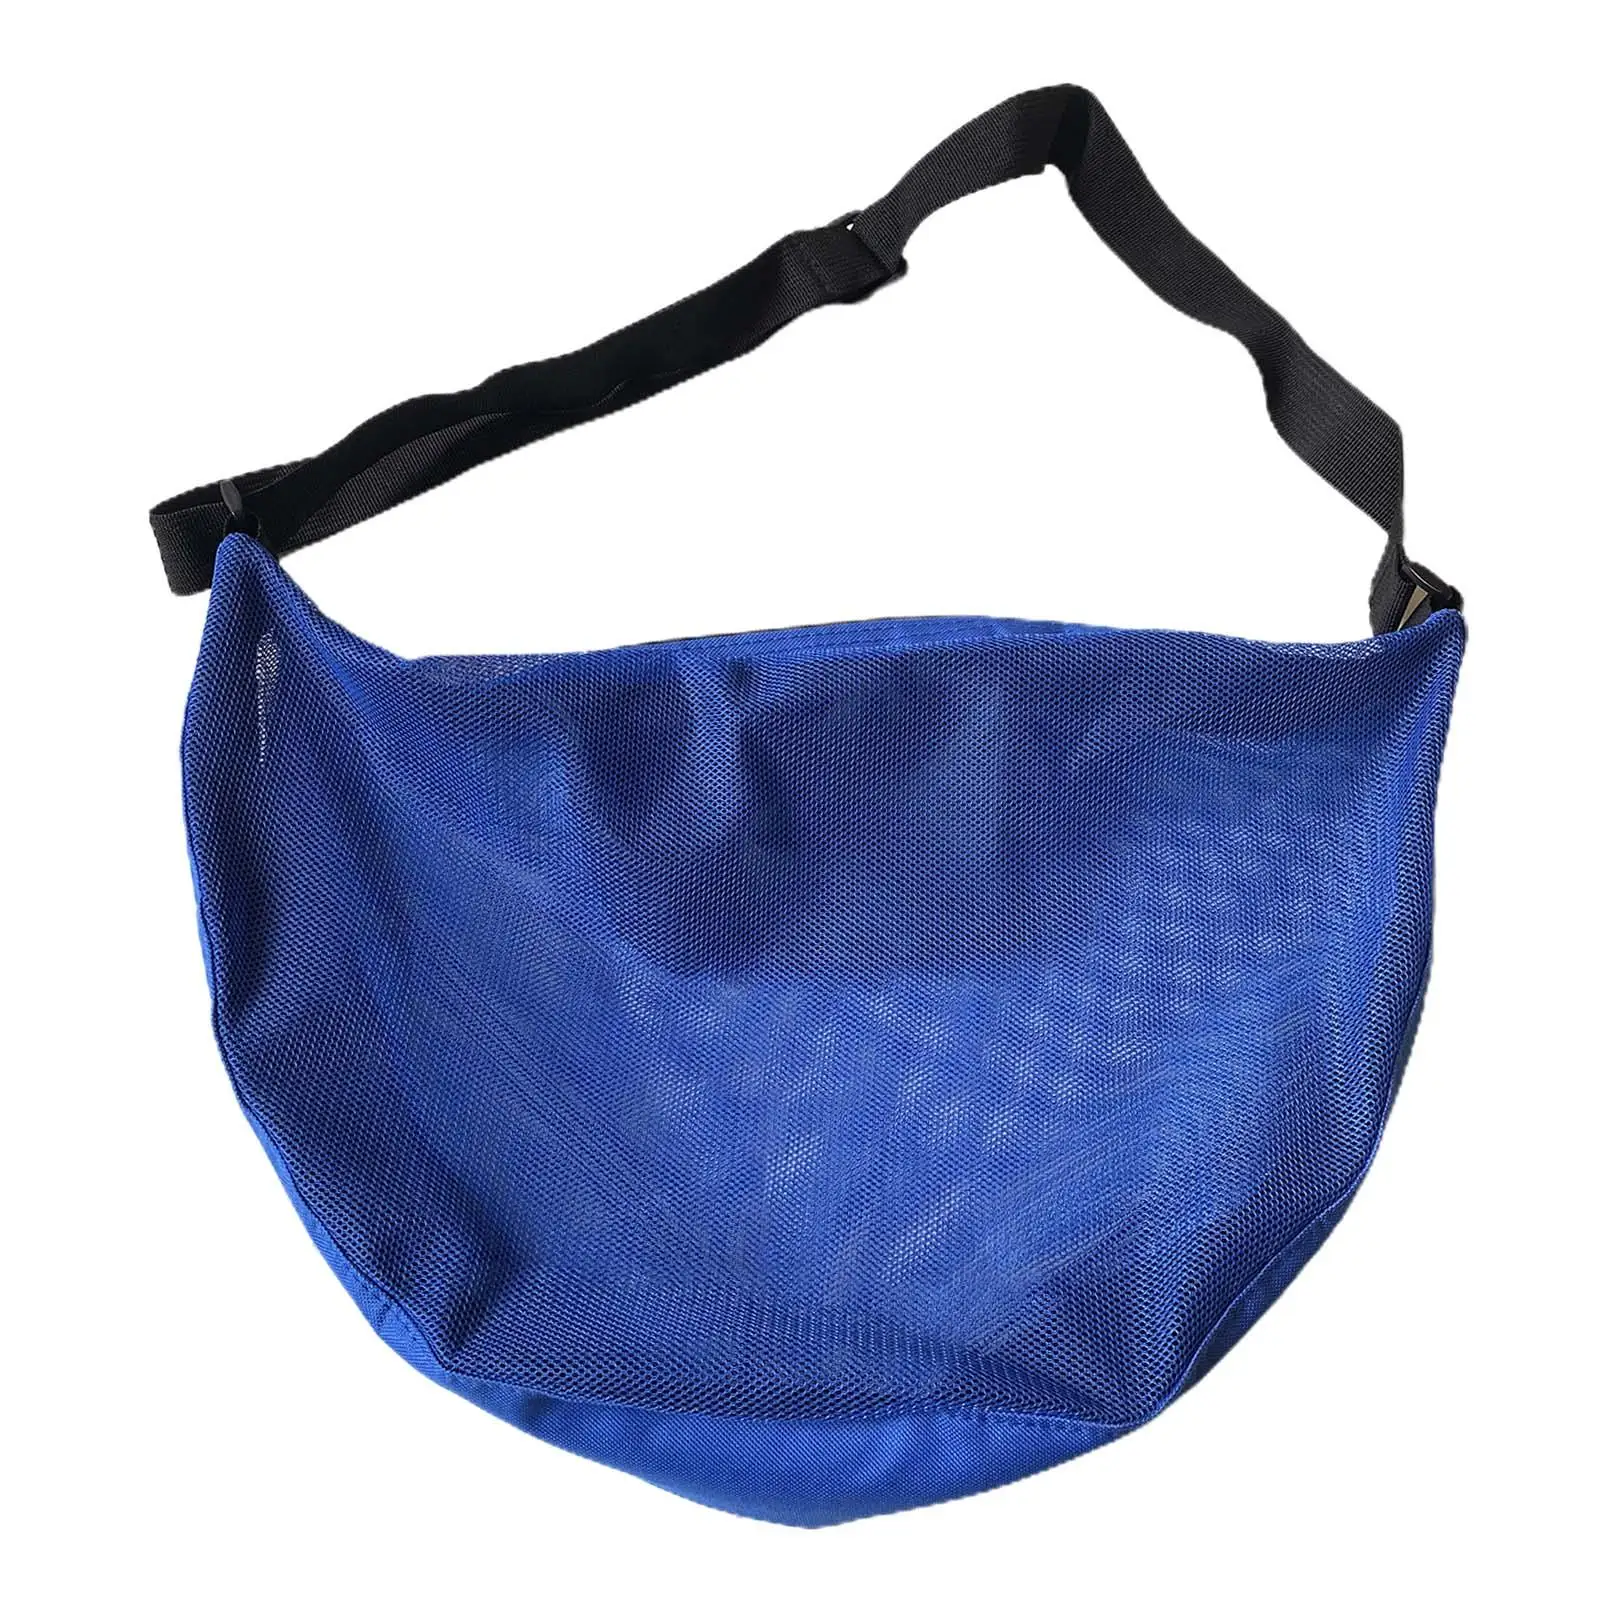 Basketball Carry Bag Storage with Shoulder Strap Ball Holder Ball Bags Mesh for Garage Soccer Exercise Practice Football